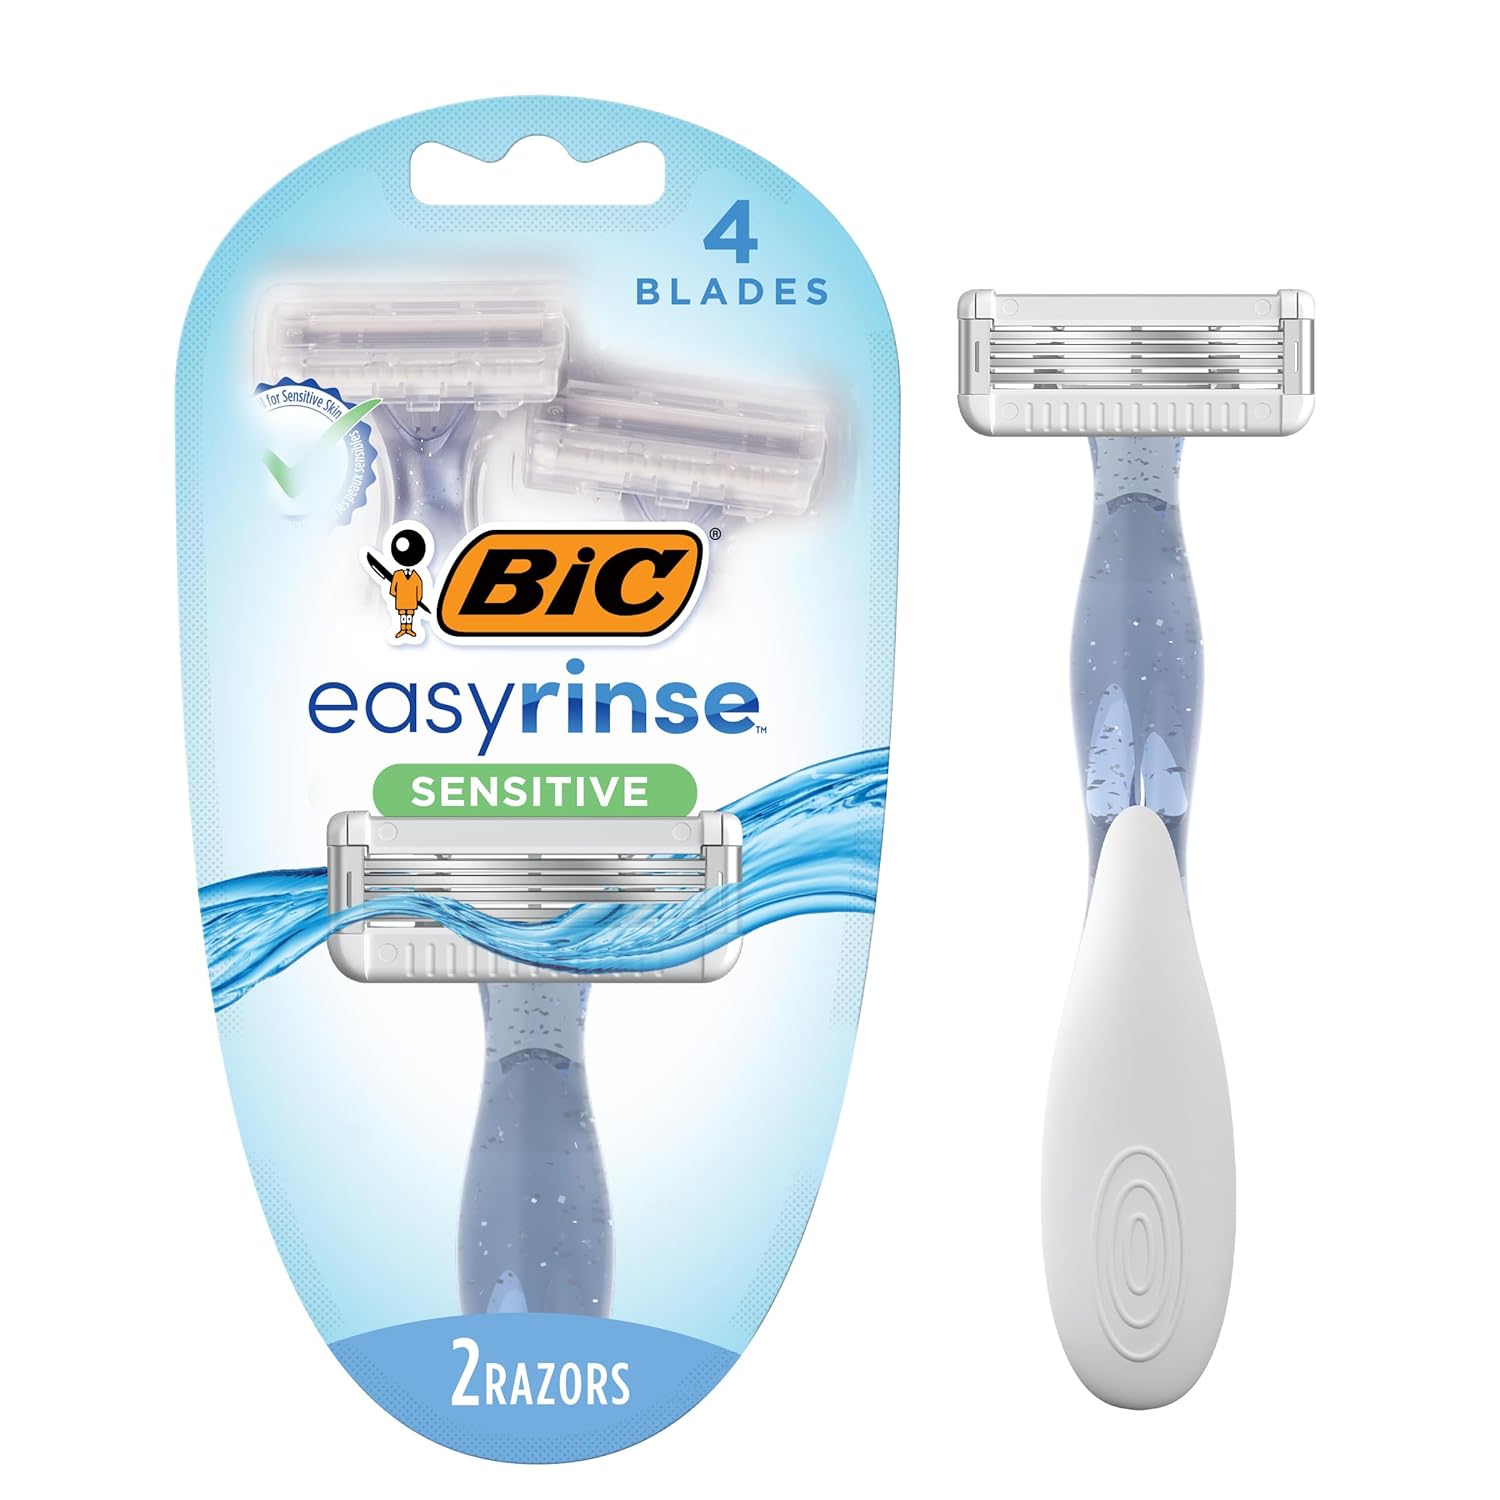 BIC EasyRinse Sensitive Anti-Clogging Women's Disposable Razors, Clinically Proven for Sensitive Skin, Shaving Razors With 4 Blades, 2 Count